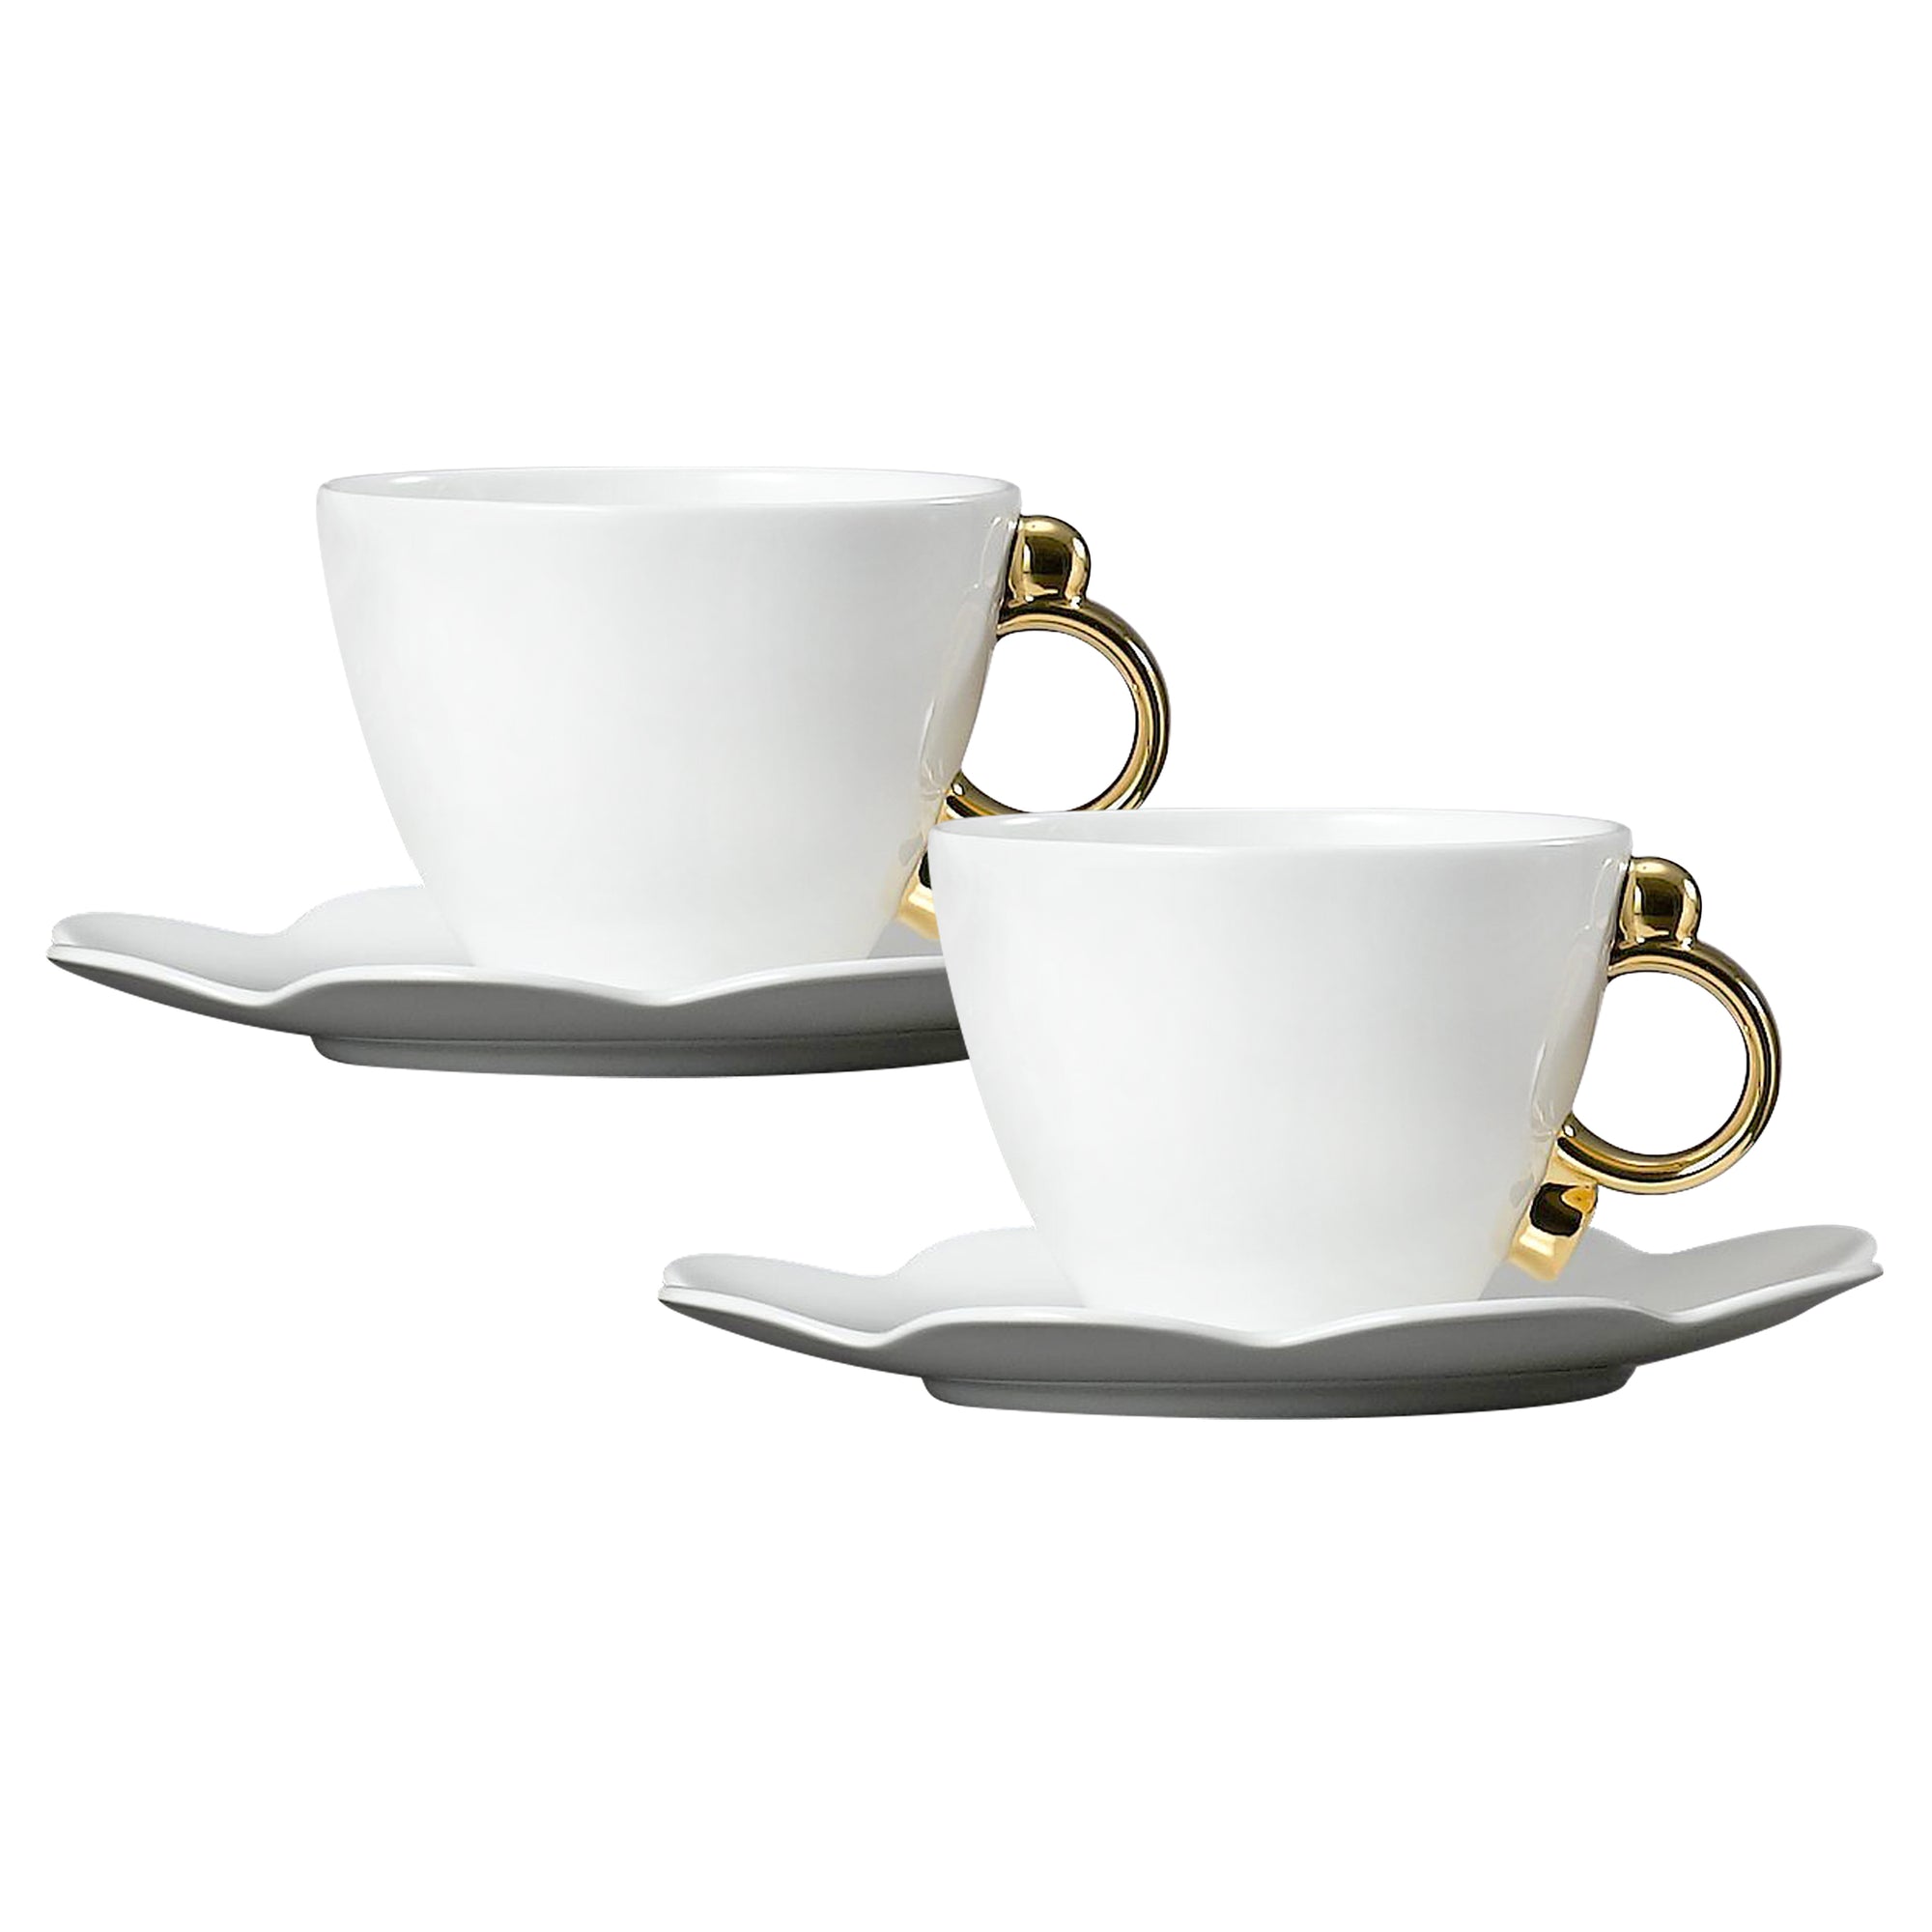 Prouna Cup & Saucer with Gold Rim Set of 2 White Background Photo